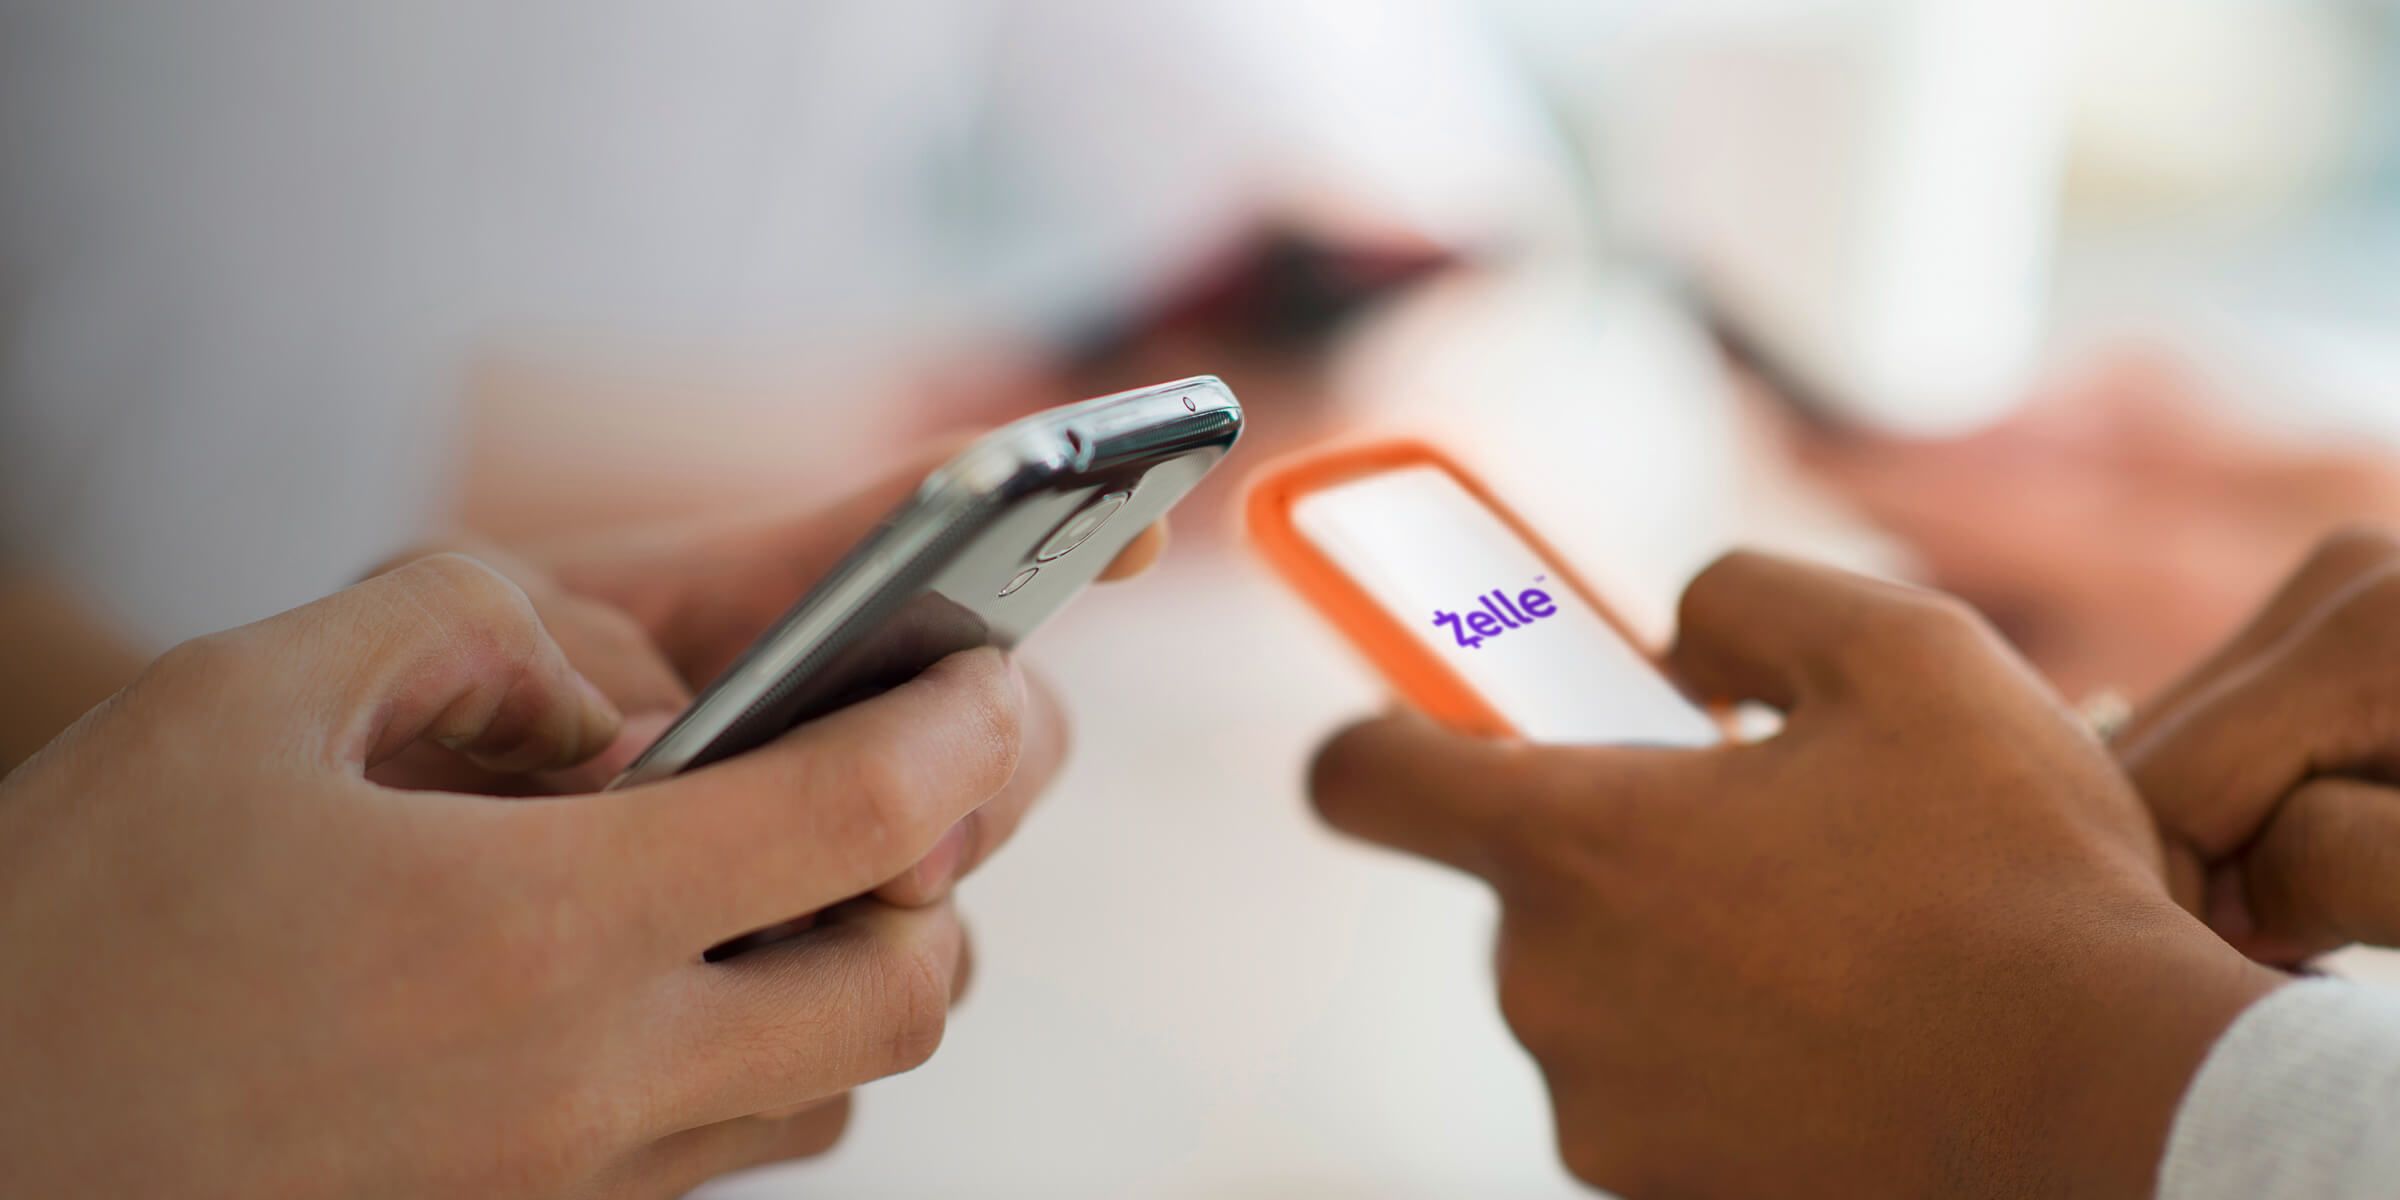 Two people using zelle on mobile phones